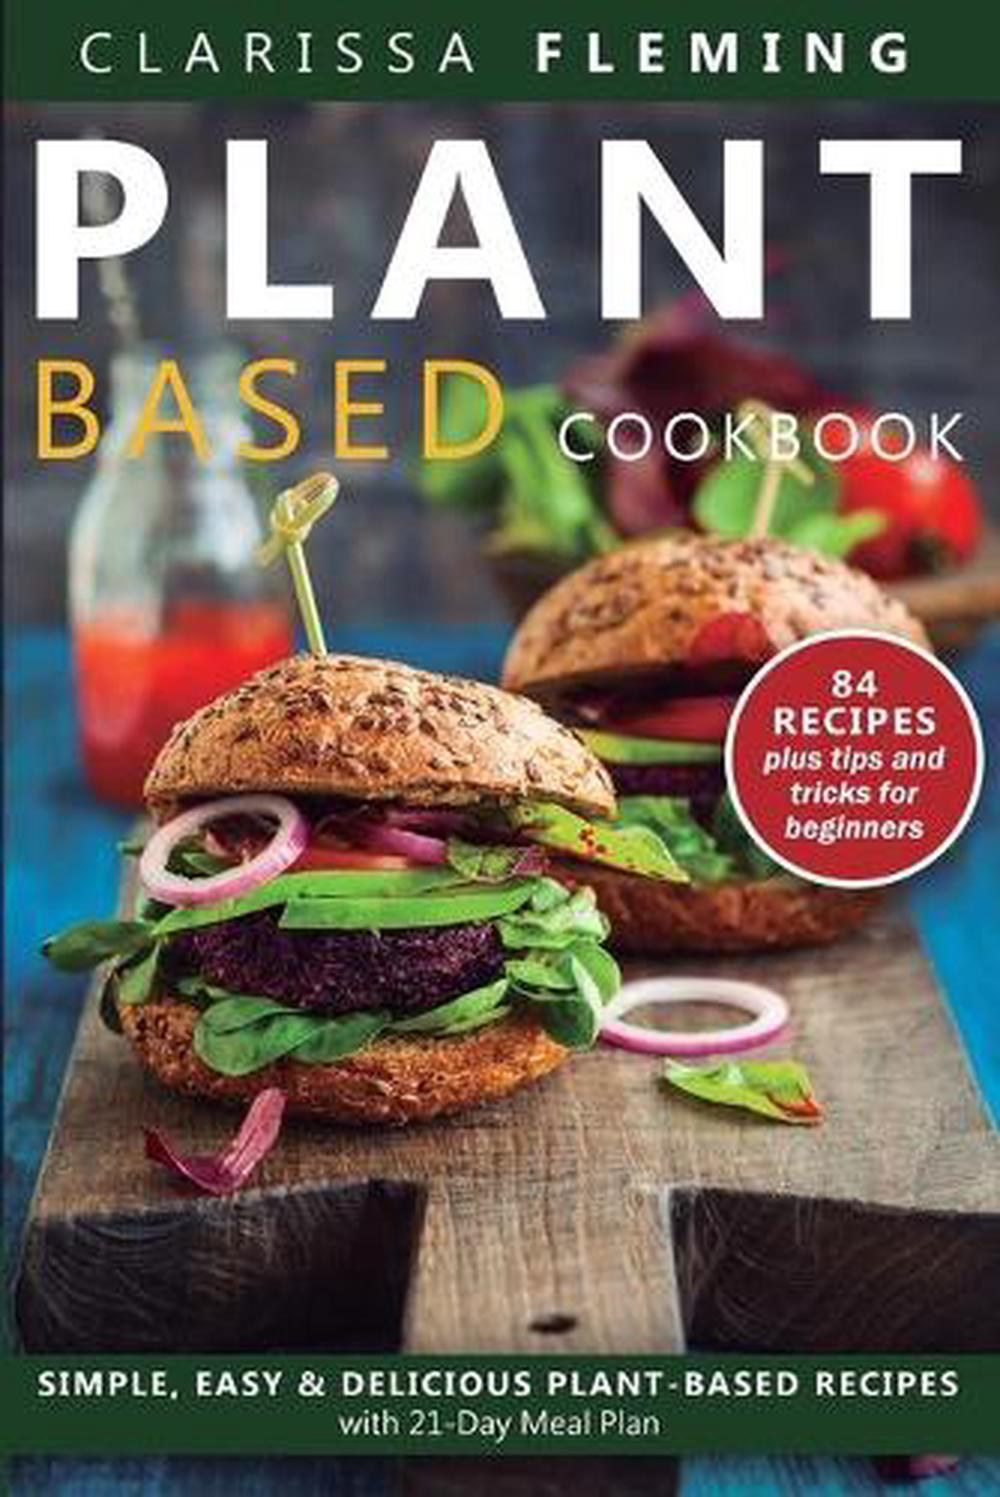 Plant Based Diet Cookbook: Simple, Easy & Delicious Plant-Based Recipes